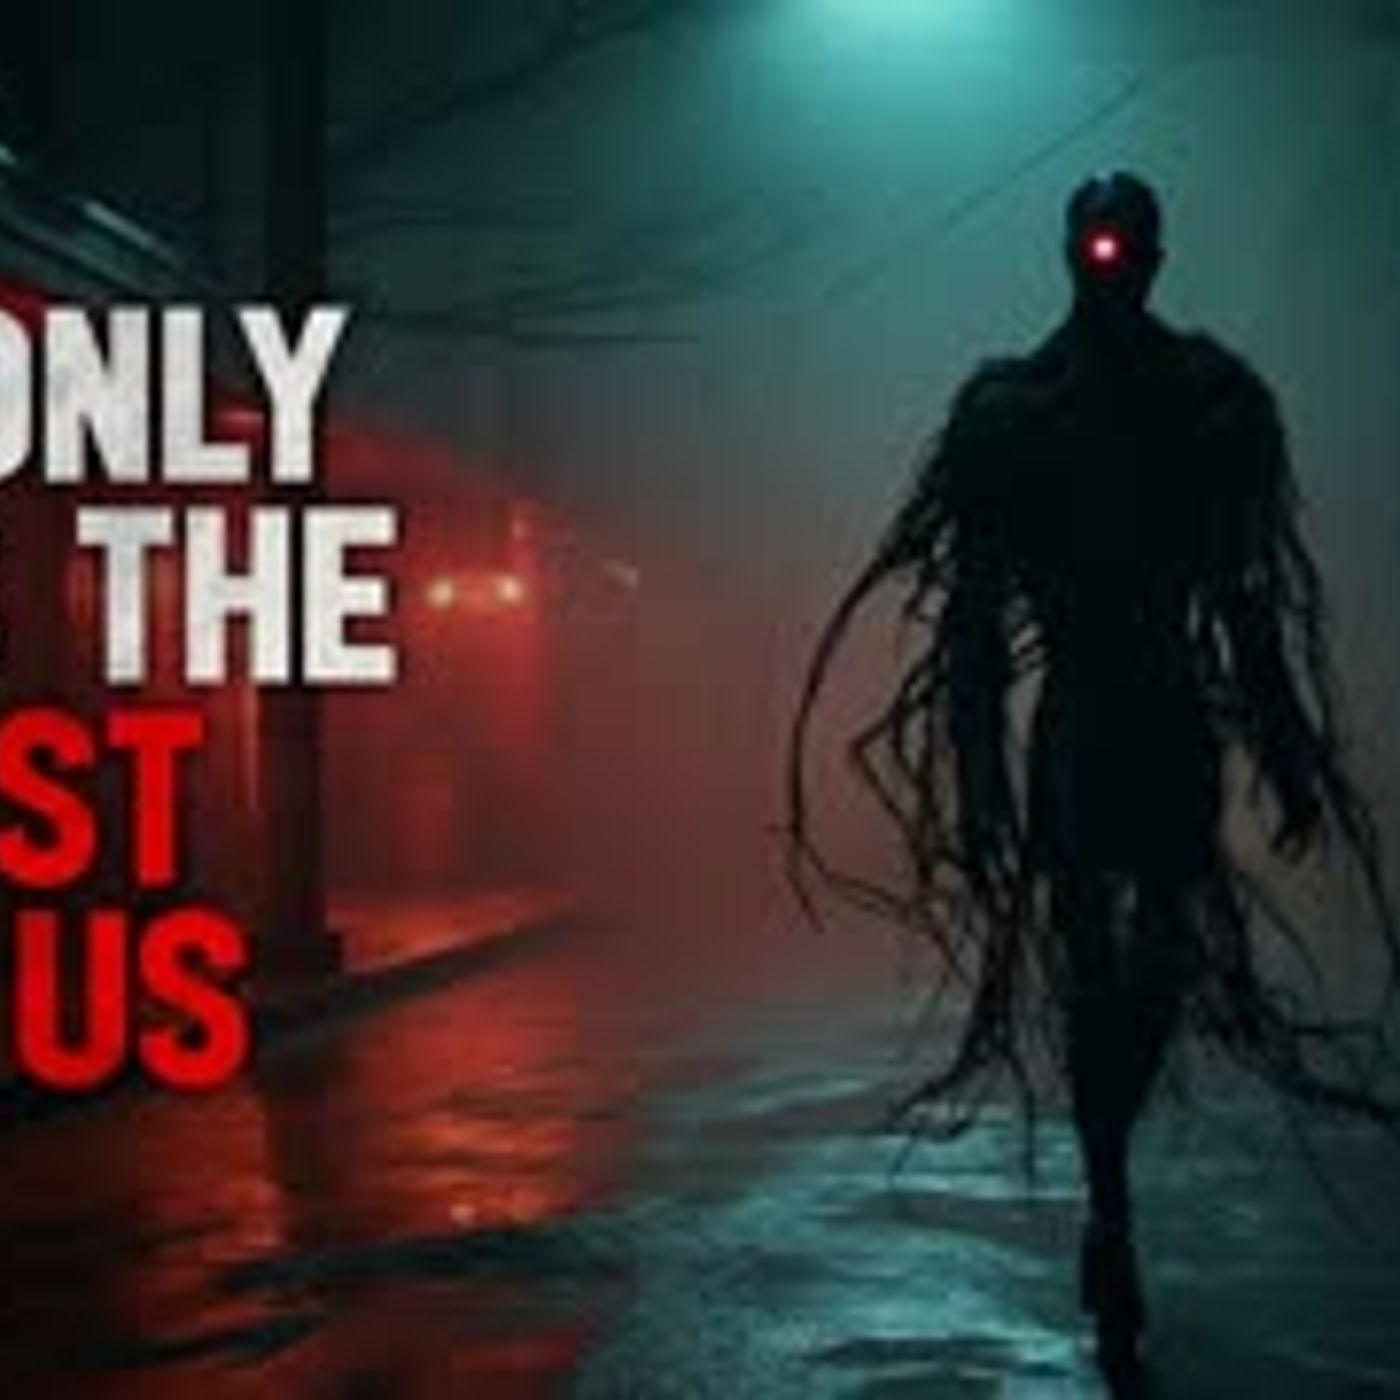 ”He only eats the best of us” Creepypasta